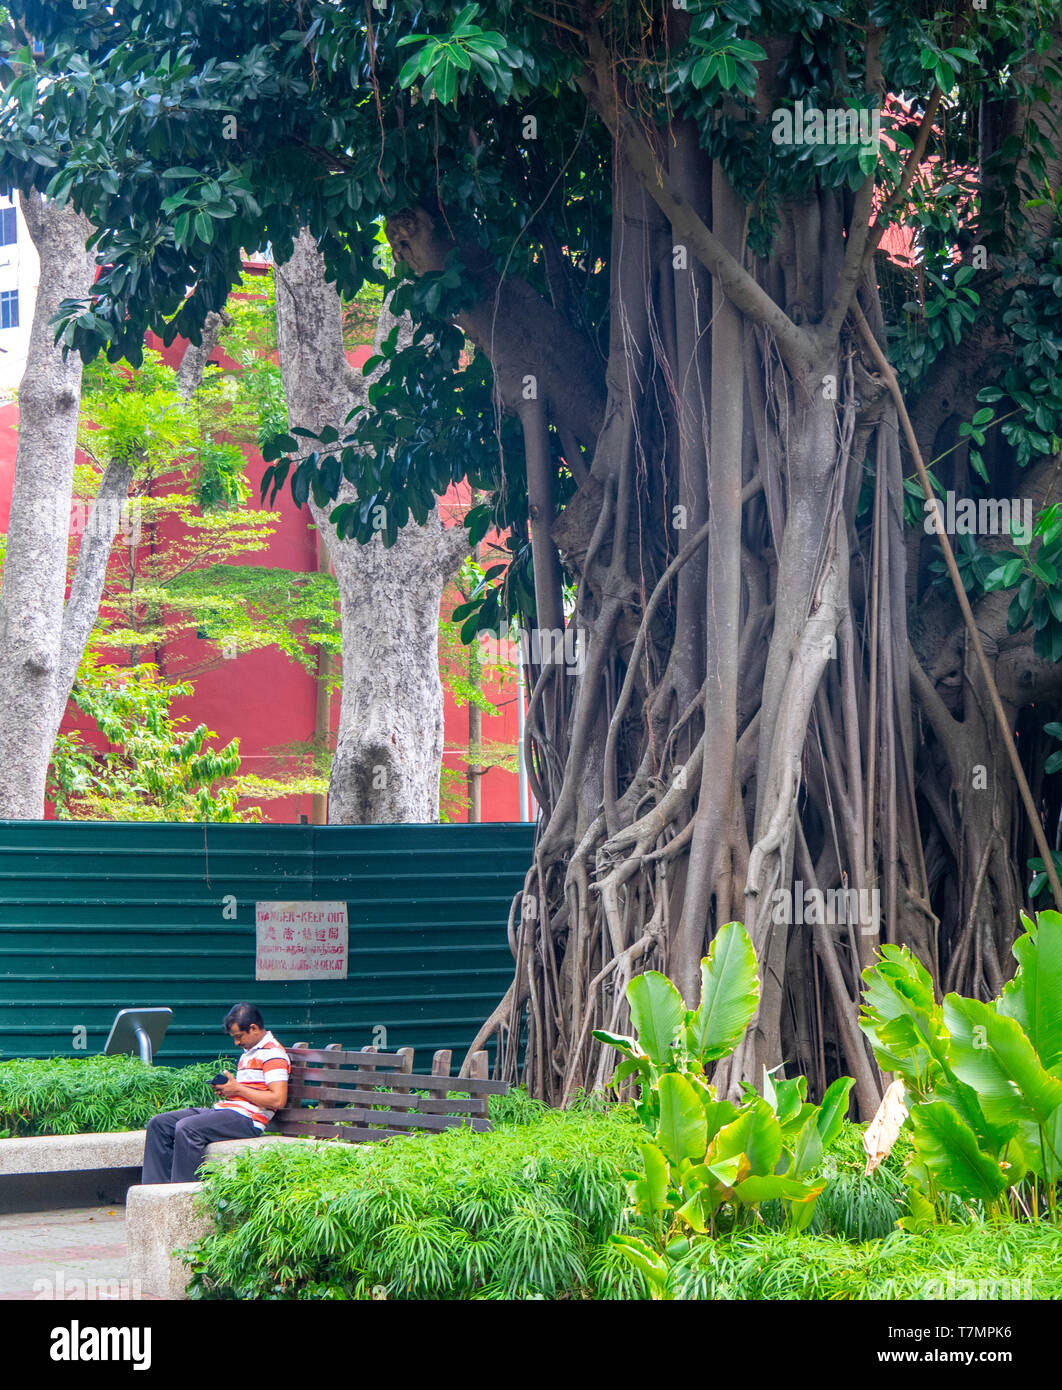 Man using his mobile telephone sitting on a bench under a banyan tree. Stock Photo